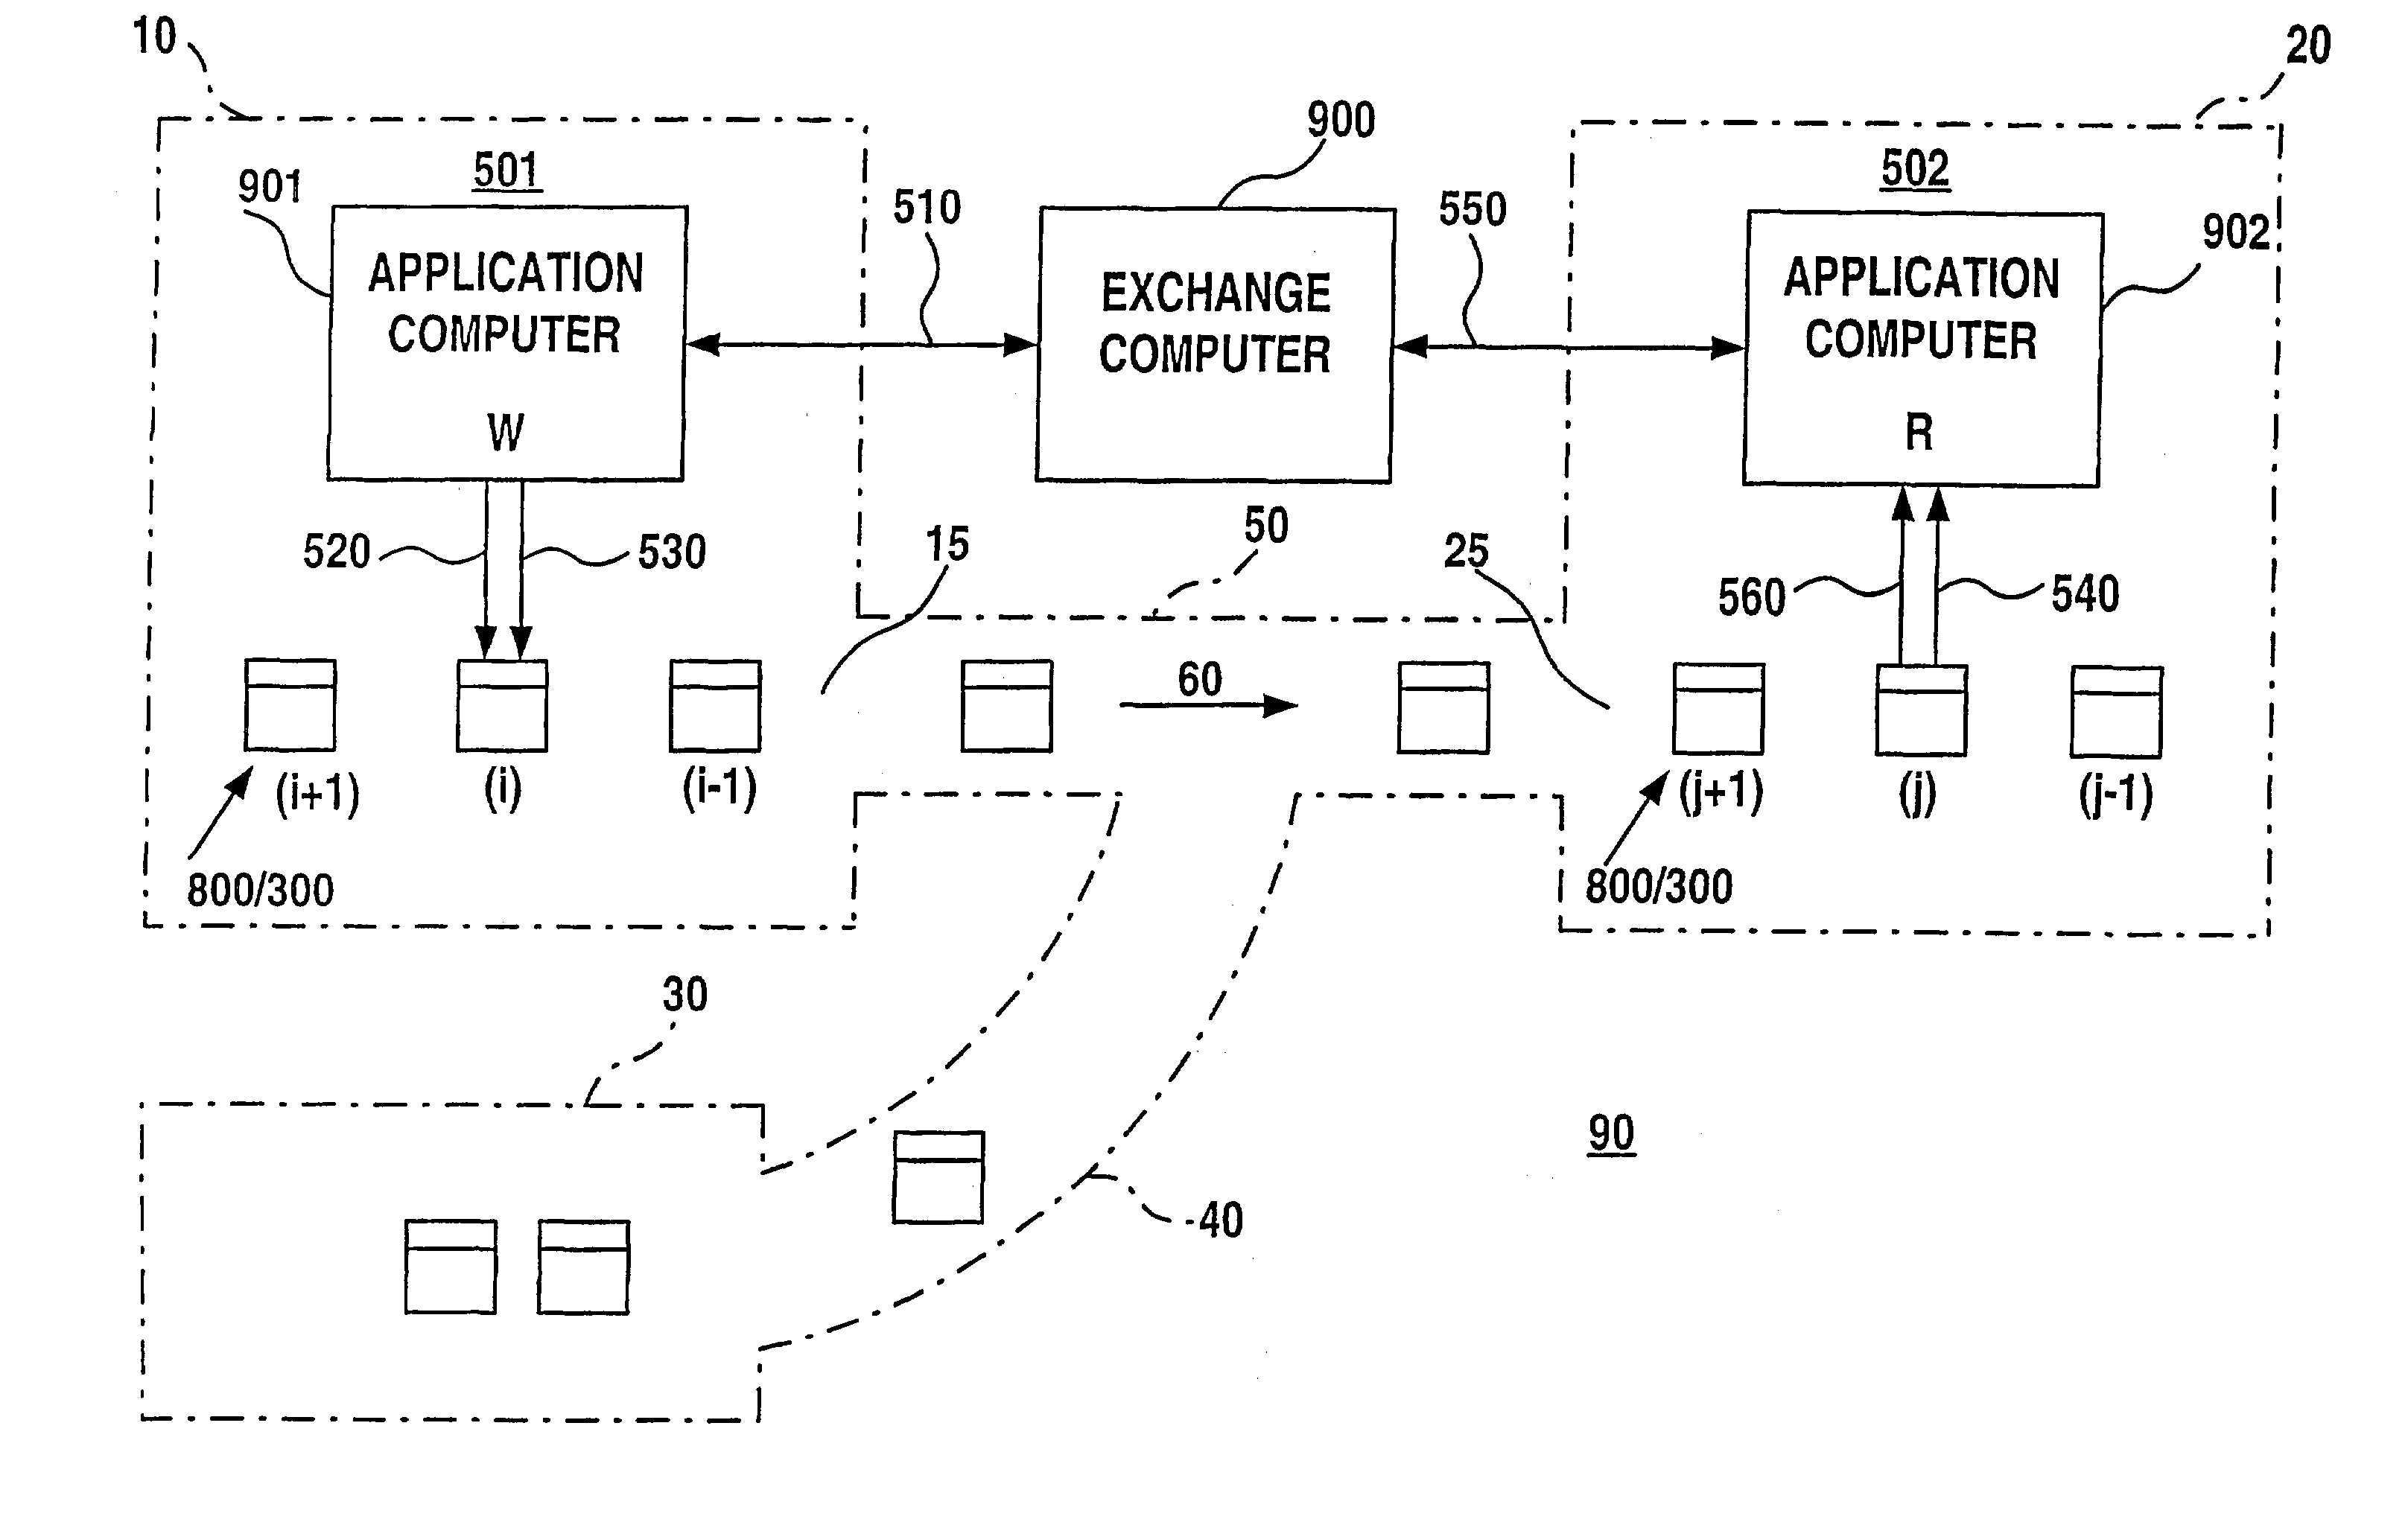 System, method, computer program product for communicating data for objects that are transported from first location to second location